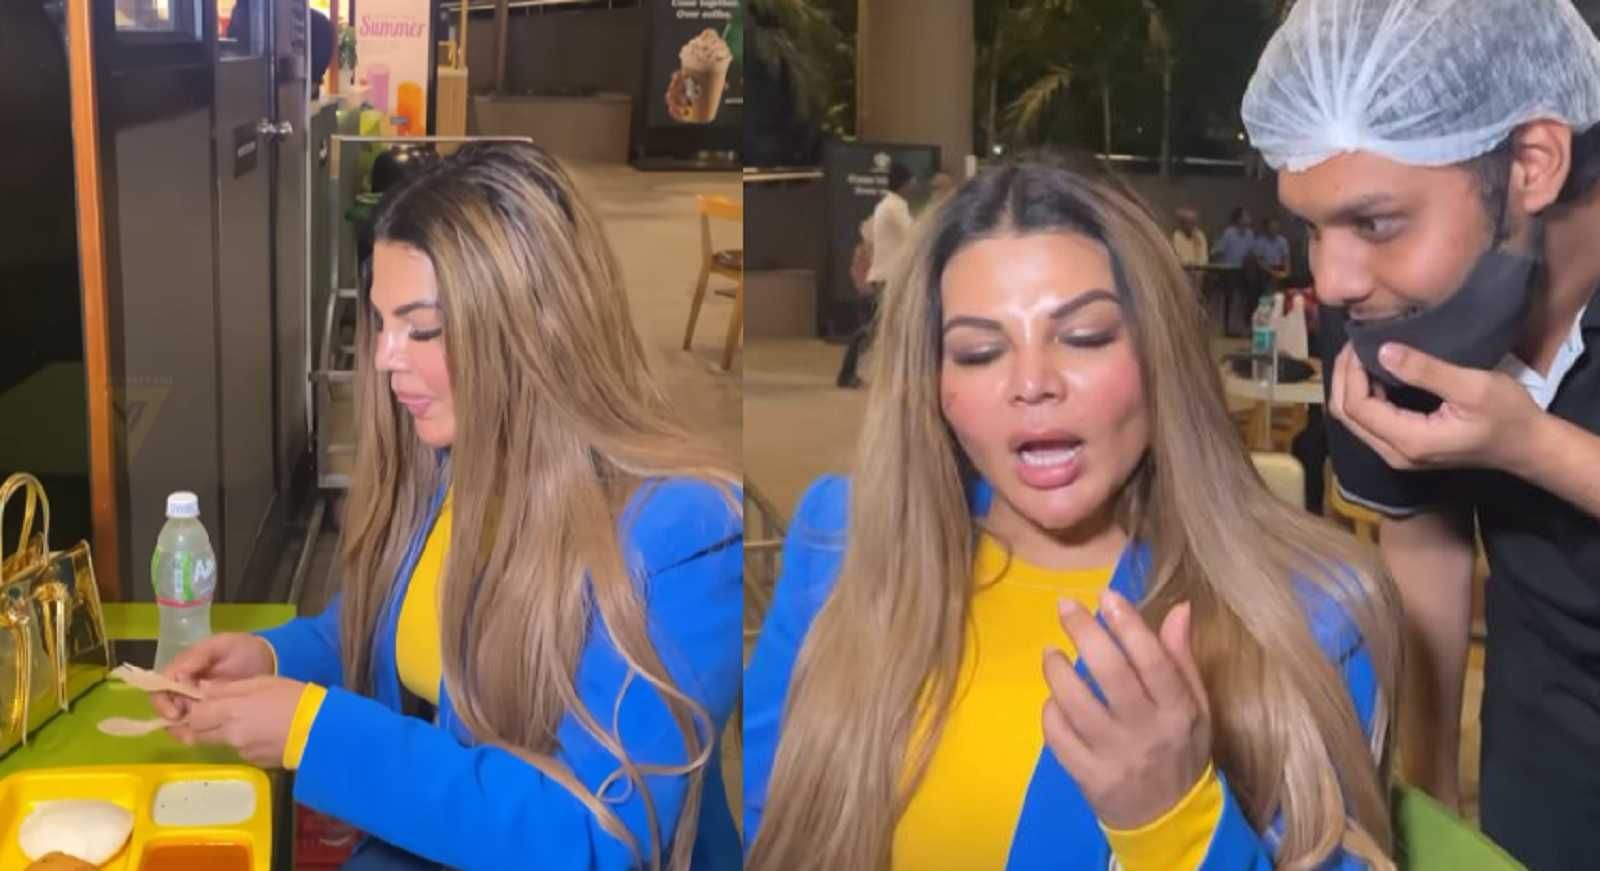 'At least she is learning and trying': Rakhi Sawant recites dua for sehri at the airport, netizens laud her attempt